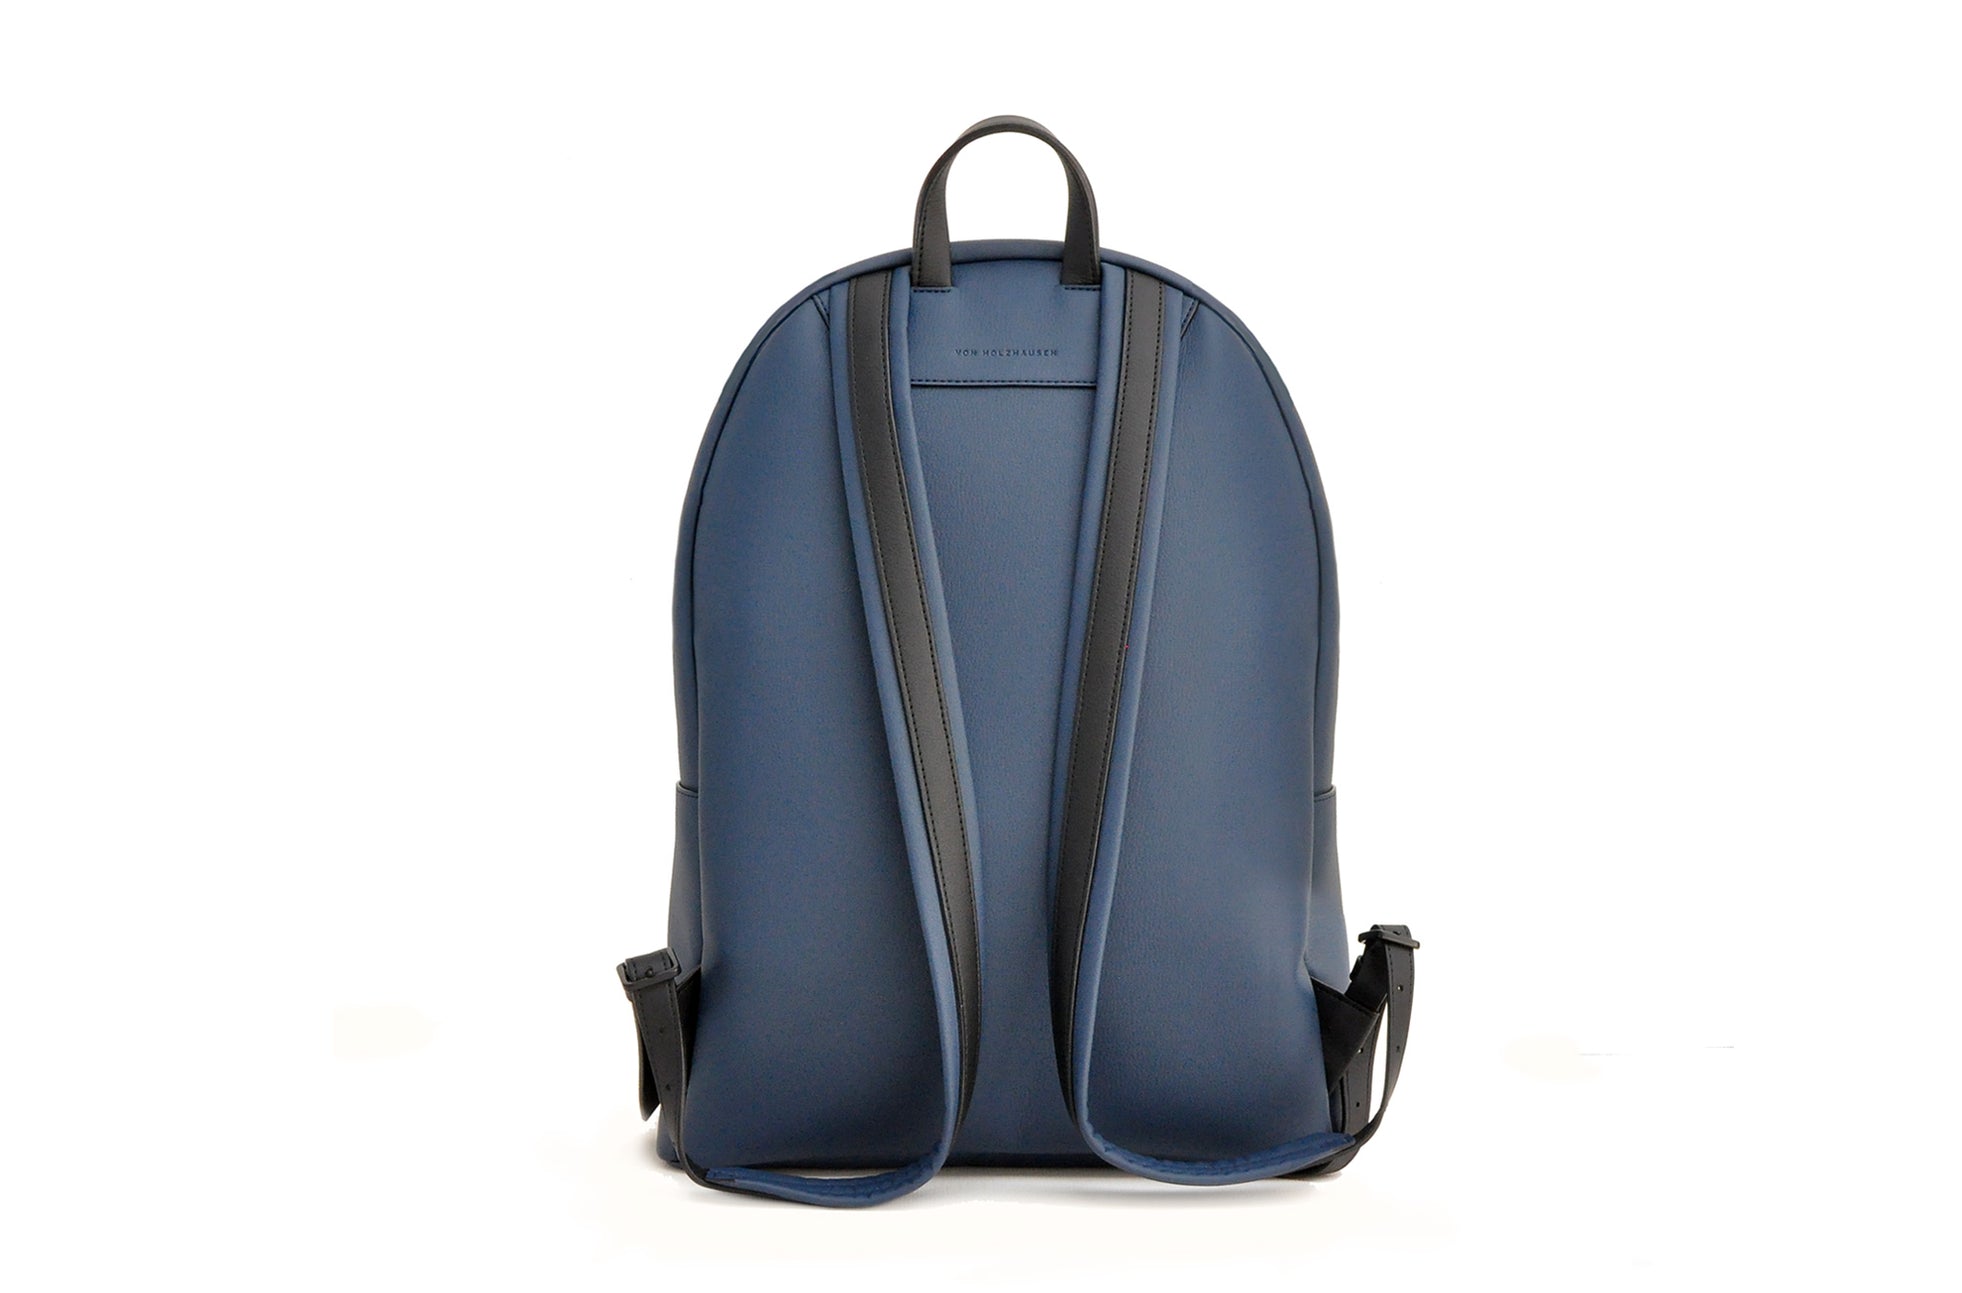 The Classic Backpack in Technik-Leather in Denim and Black image 4